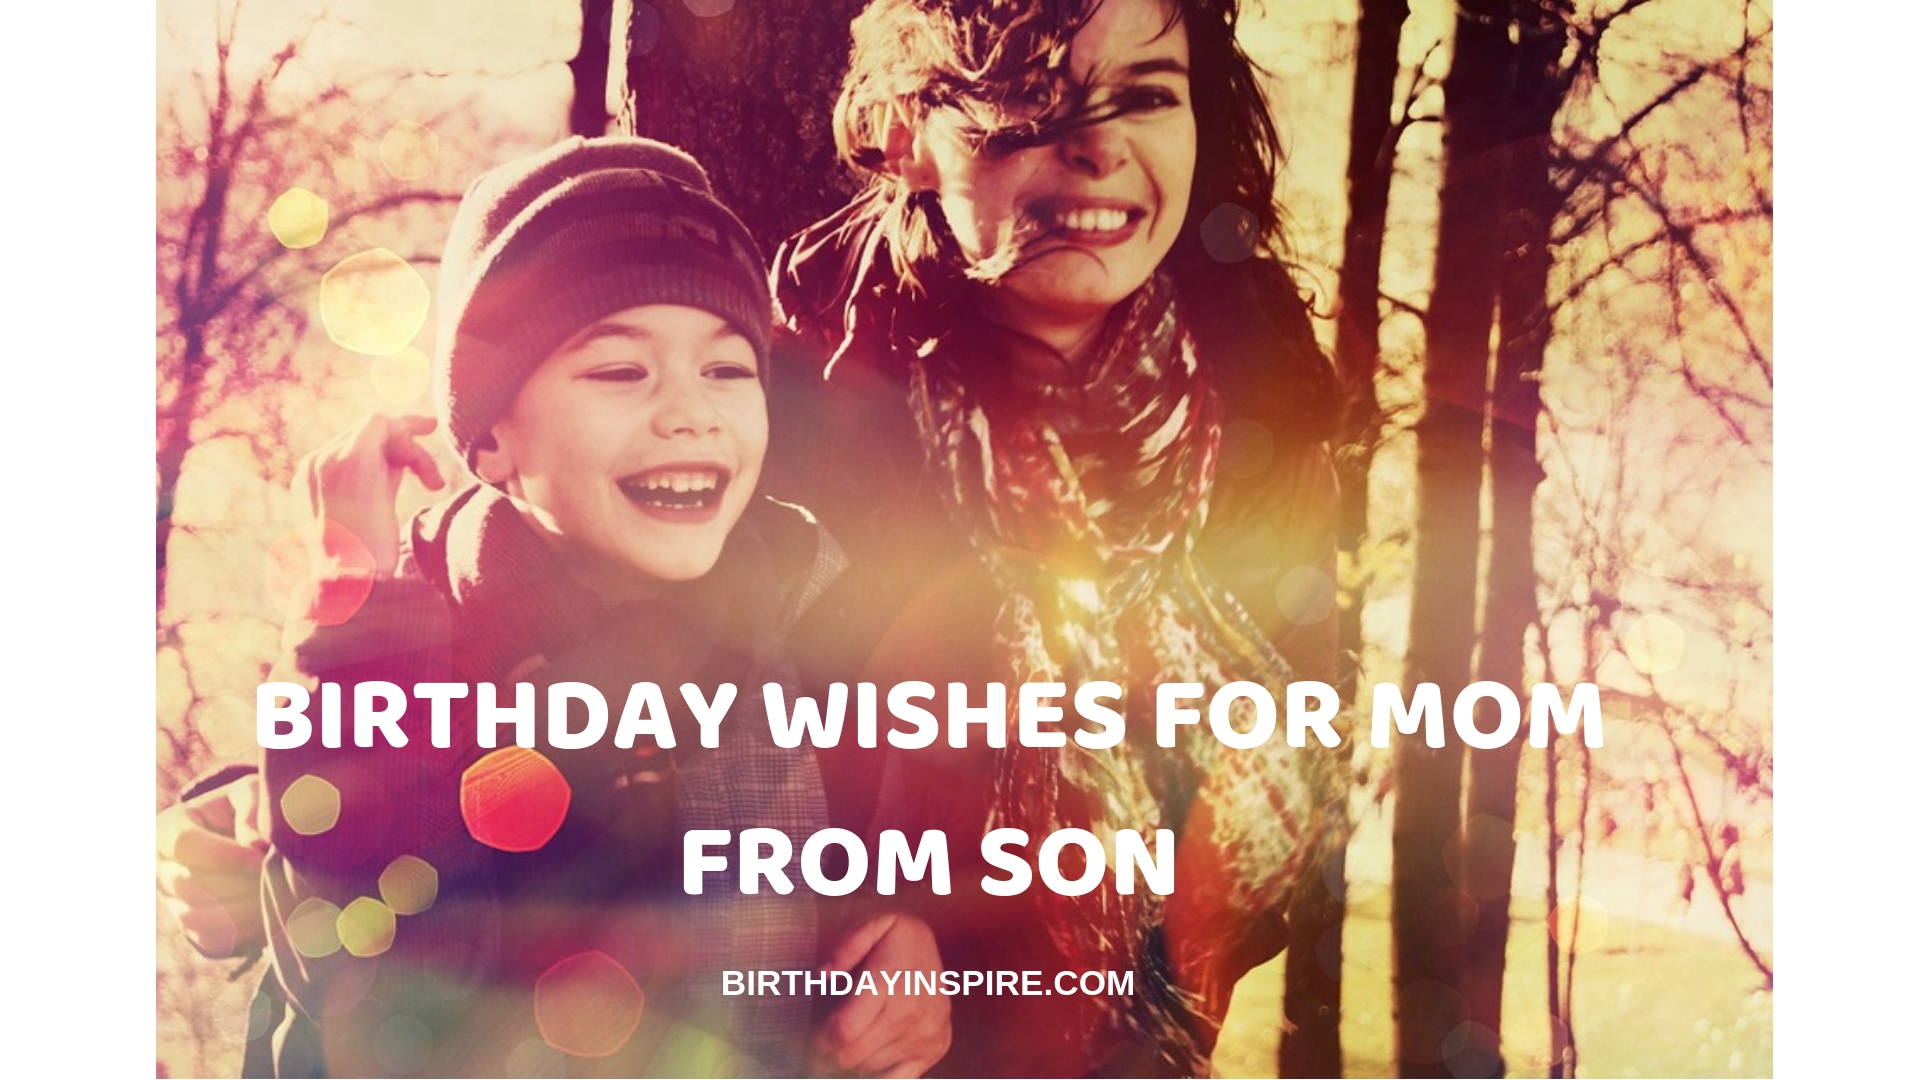 BIRTHDAY WISHES FOR MOM FROM SON